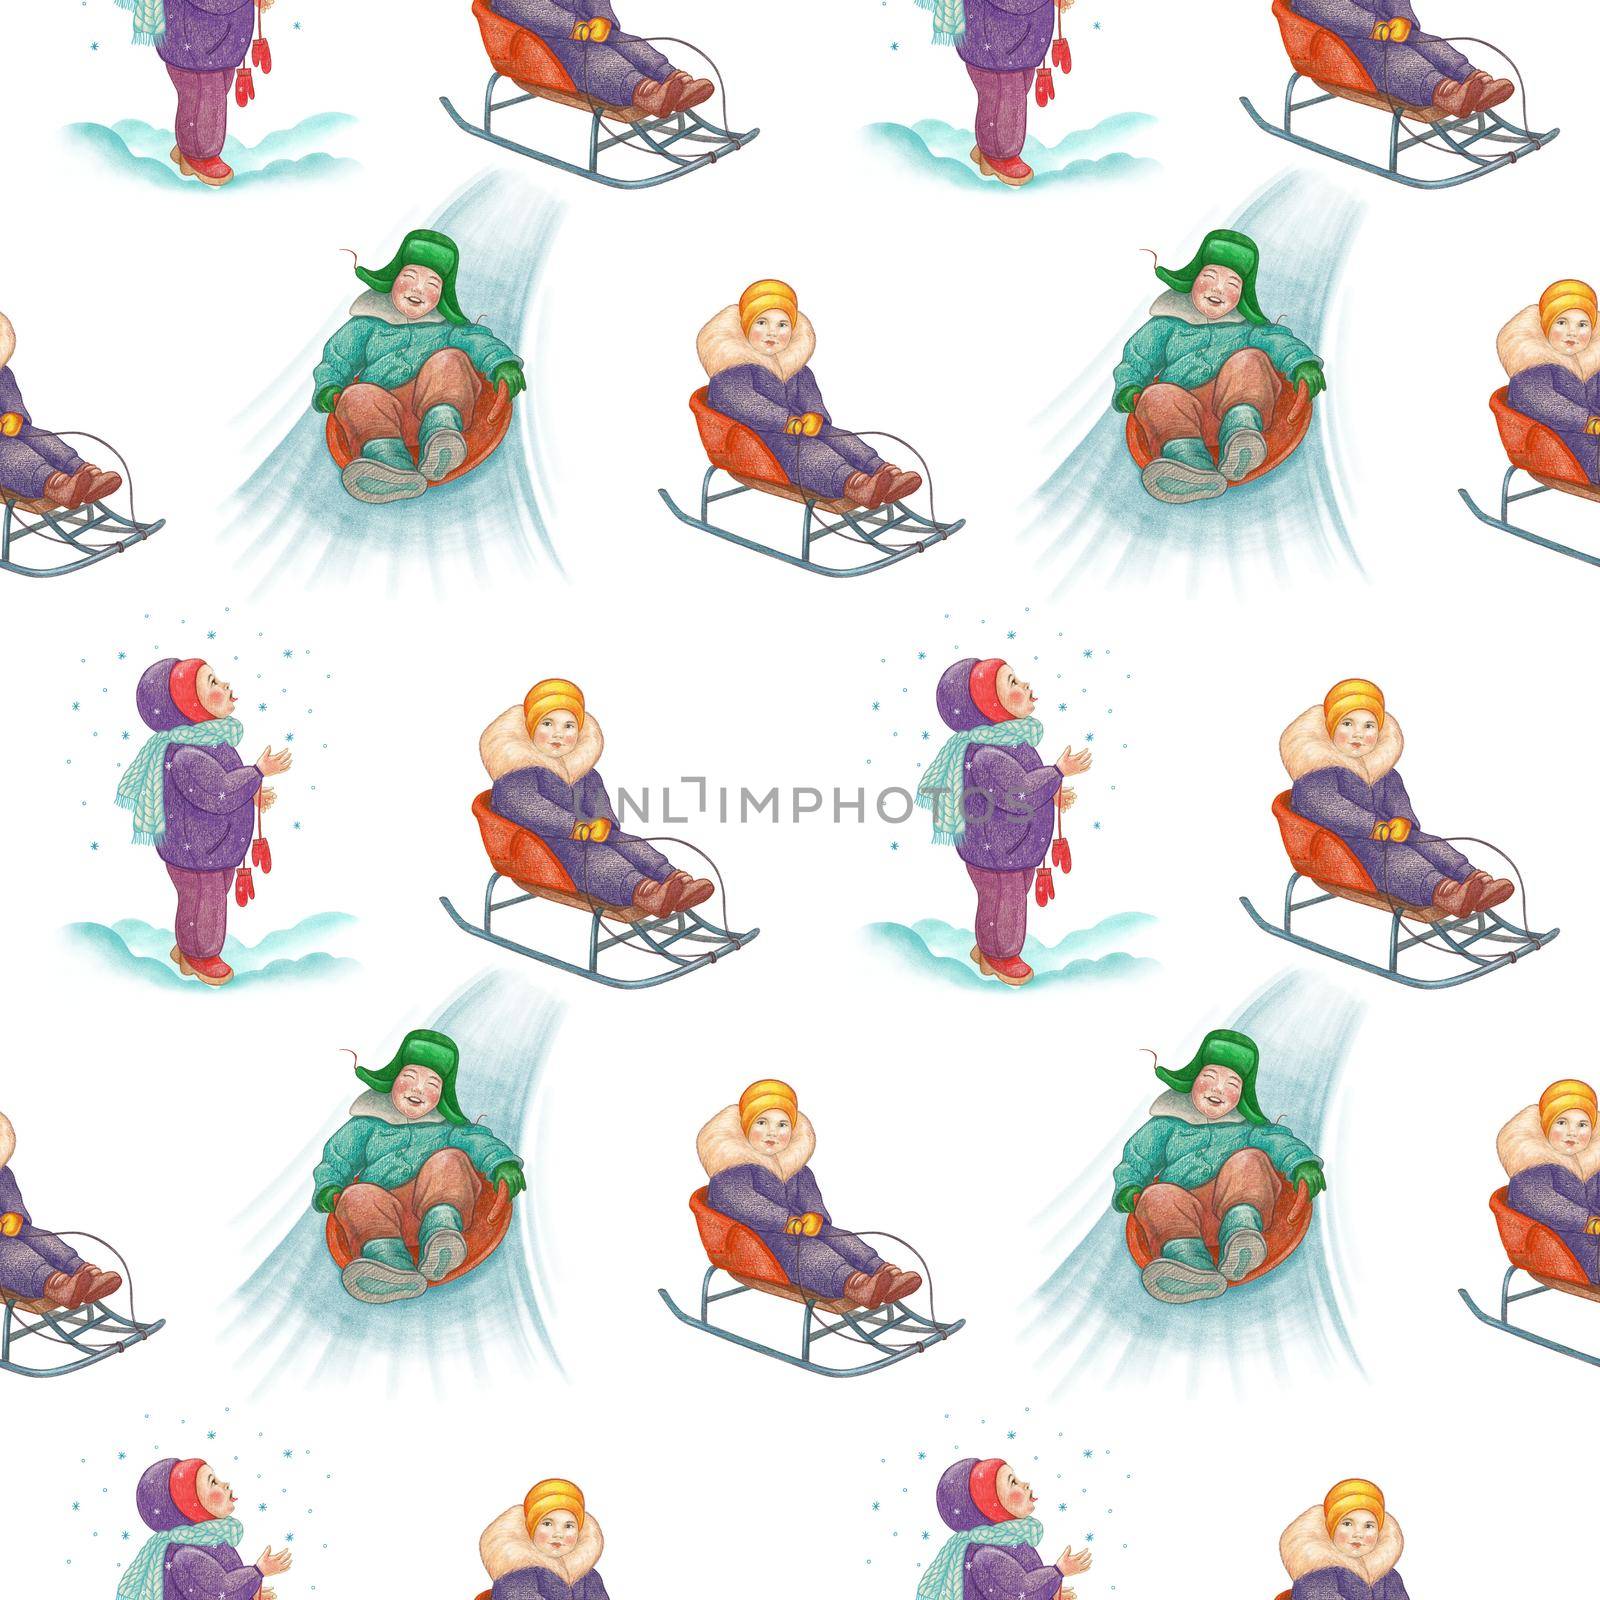 Seamless pattern. Winter. Children's fun. Children play outside, ride downhill, on a sled, catch snowflakes with their tongue. Watercolor illustration on a white background.